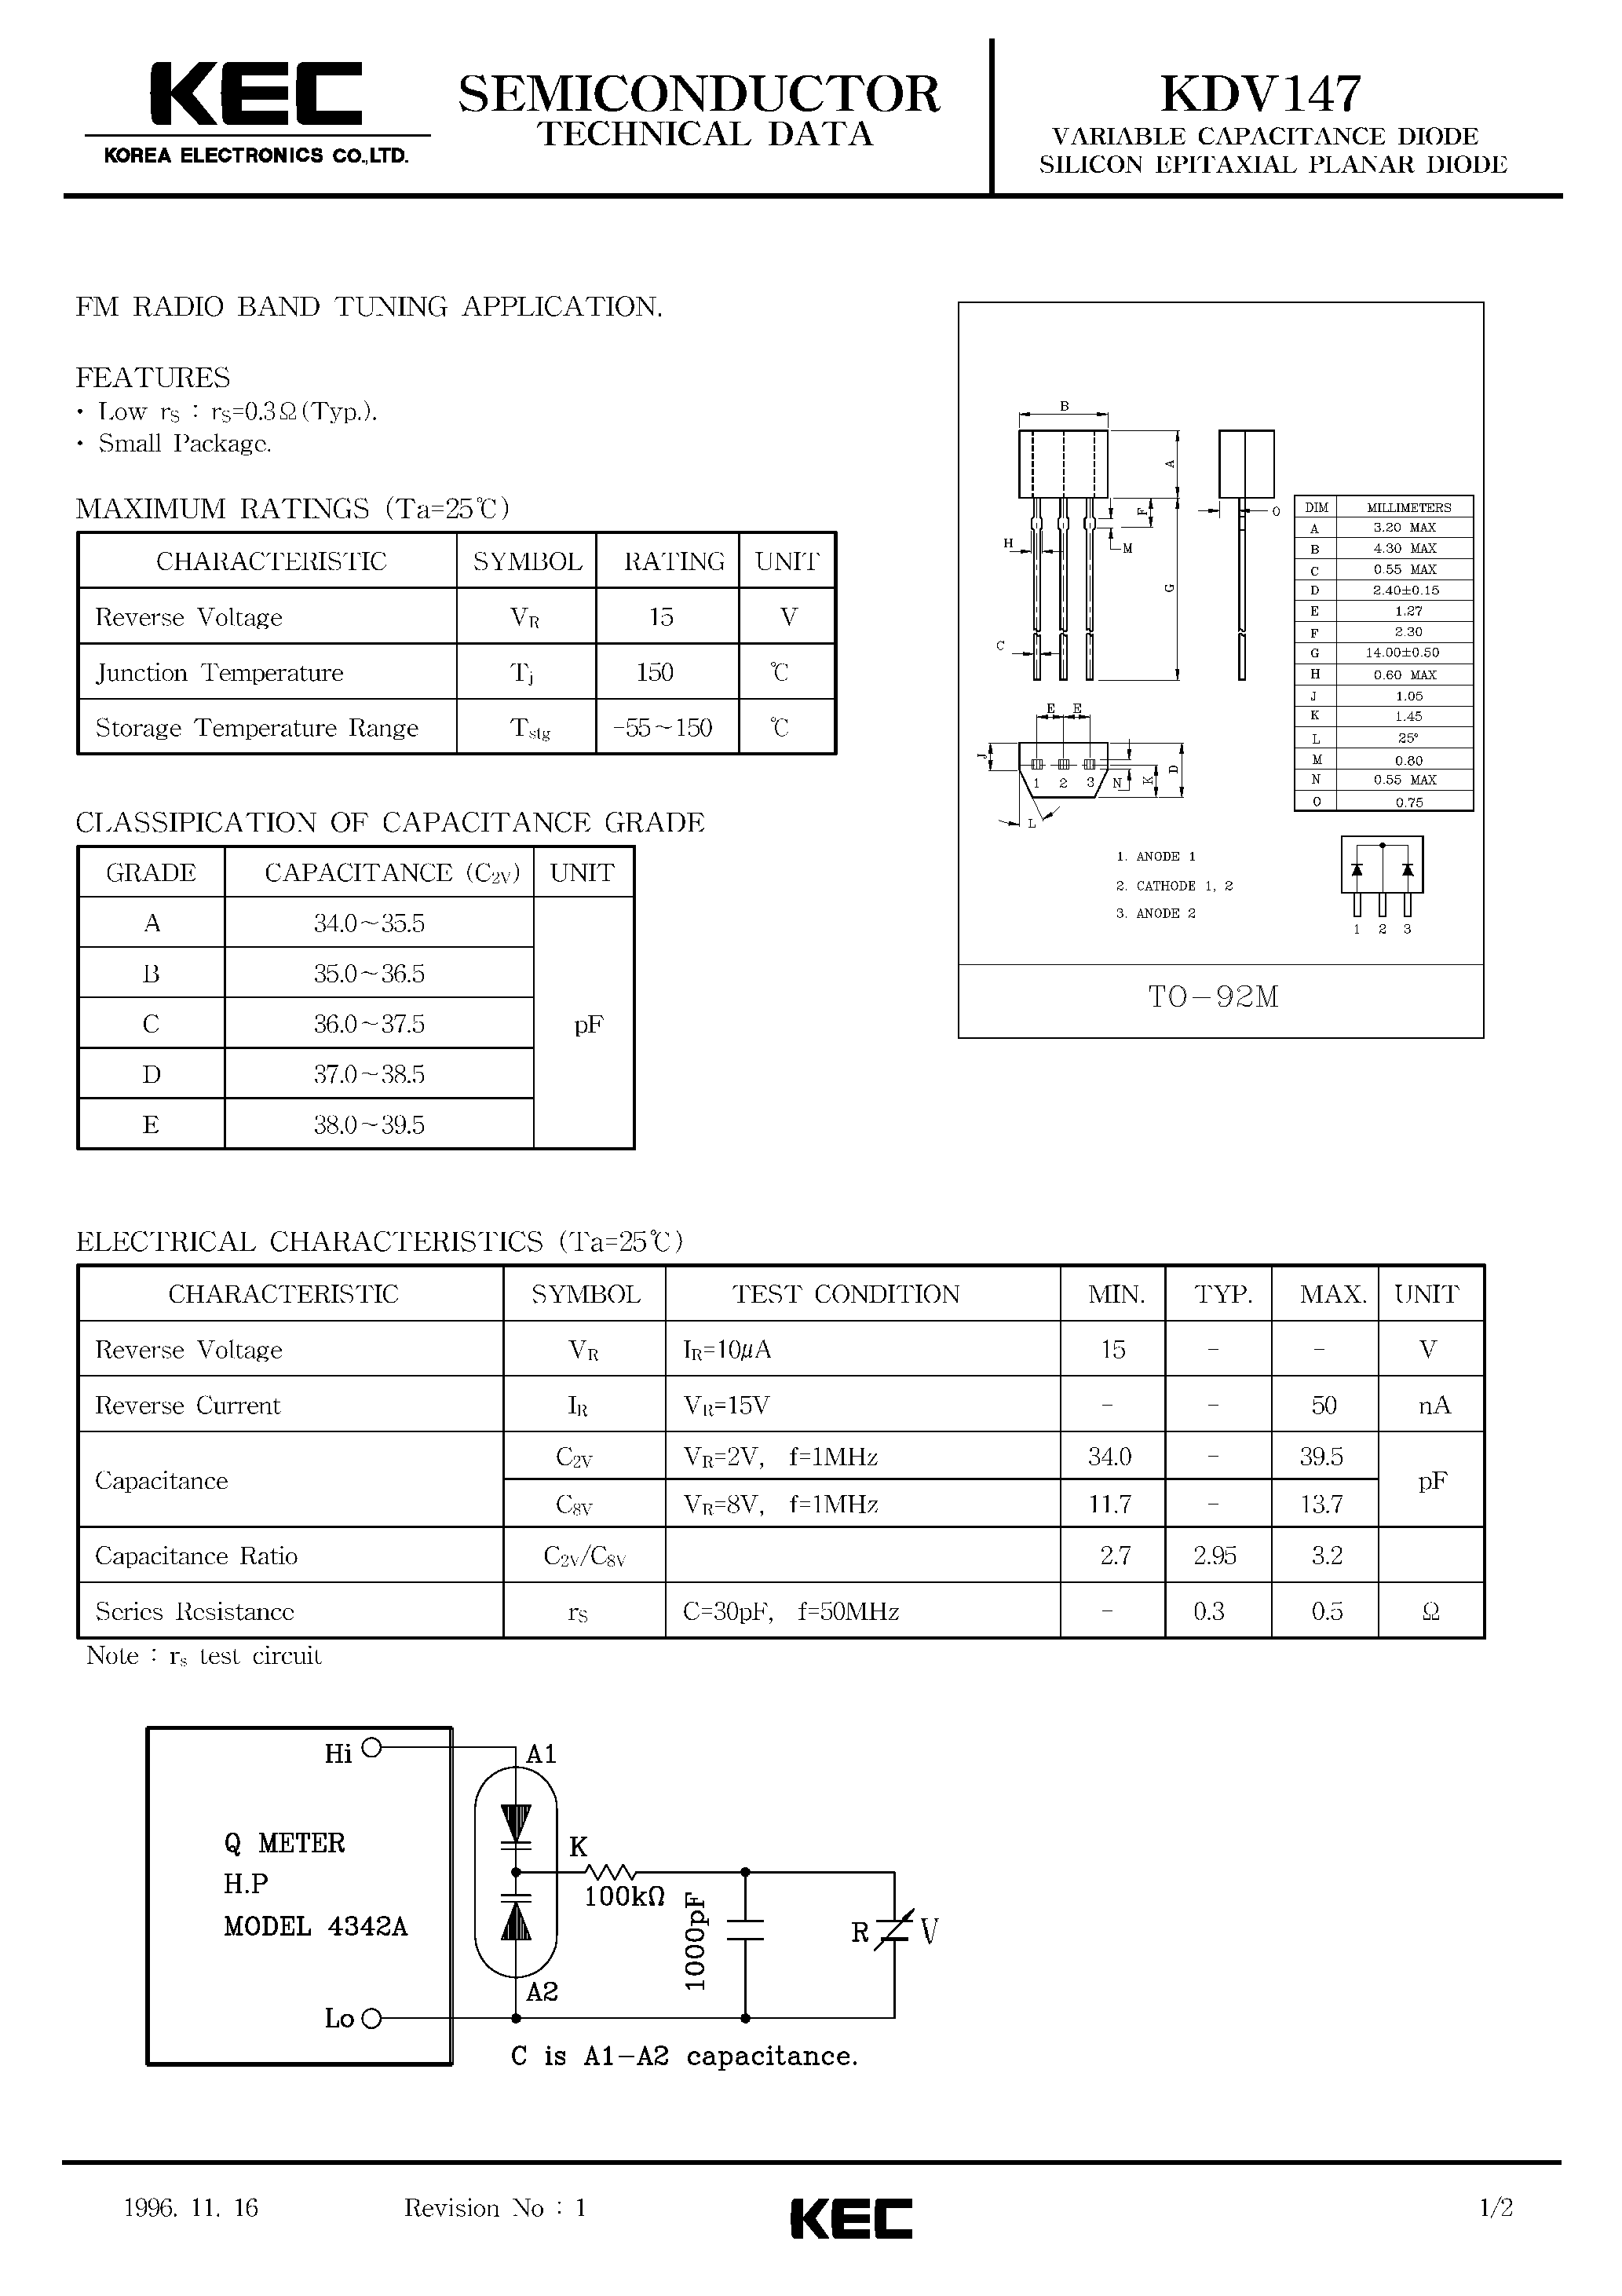 Datasheet KDV147 - VARIABLE CAPACITANCE DIODE SILICON EPITAXIAL PLANAR DIODE(FM RADIO BAND TUNING page 1